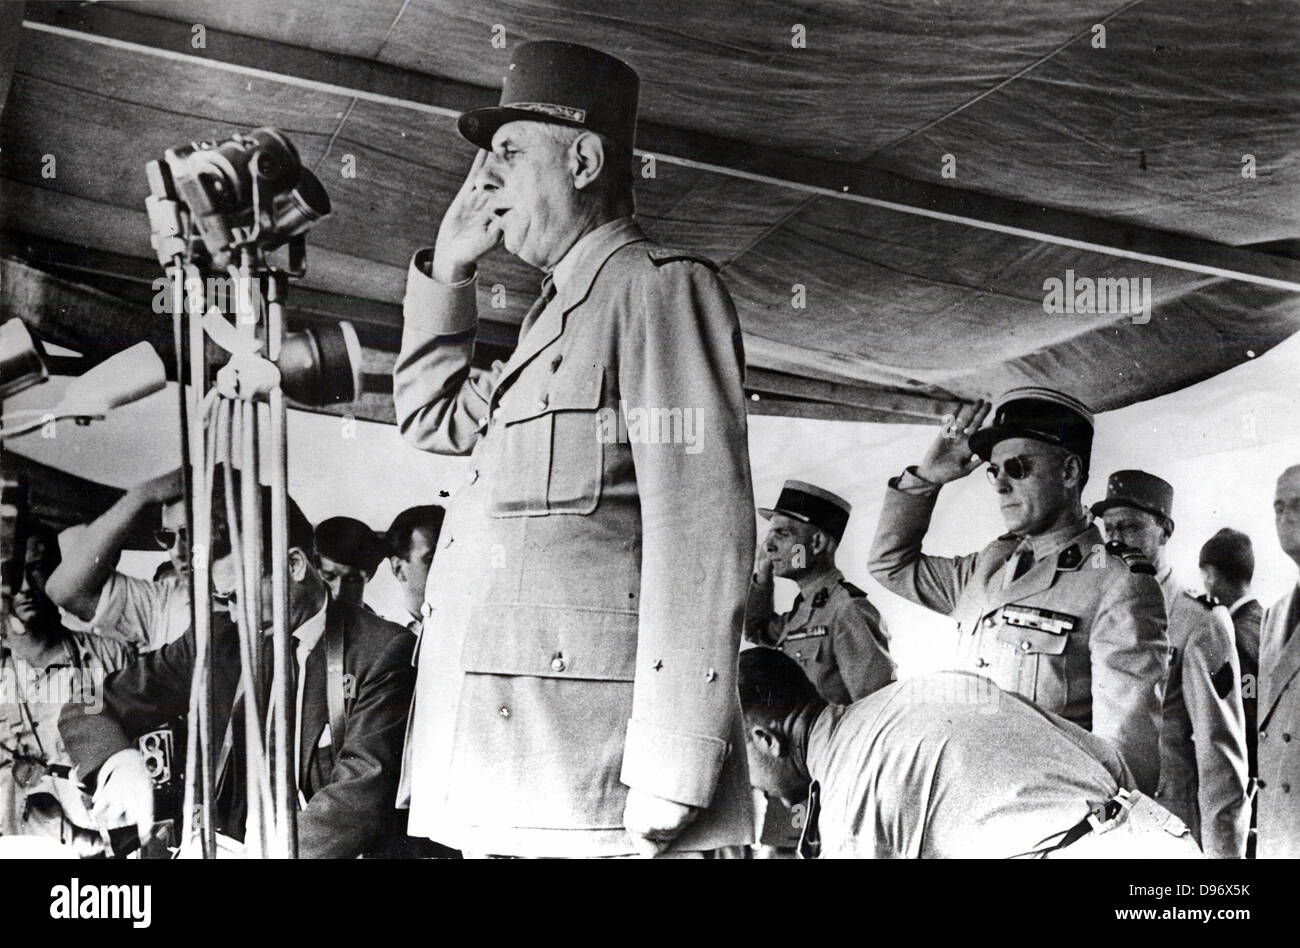 Charles de Gaulle (1890-1970) French General and first President of The Fifth Republic. President de Gaulle visits Algeria in 1958. Photograph. Stock Photo